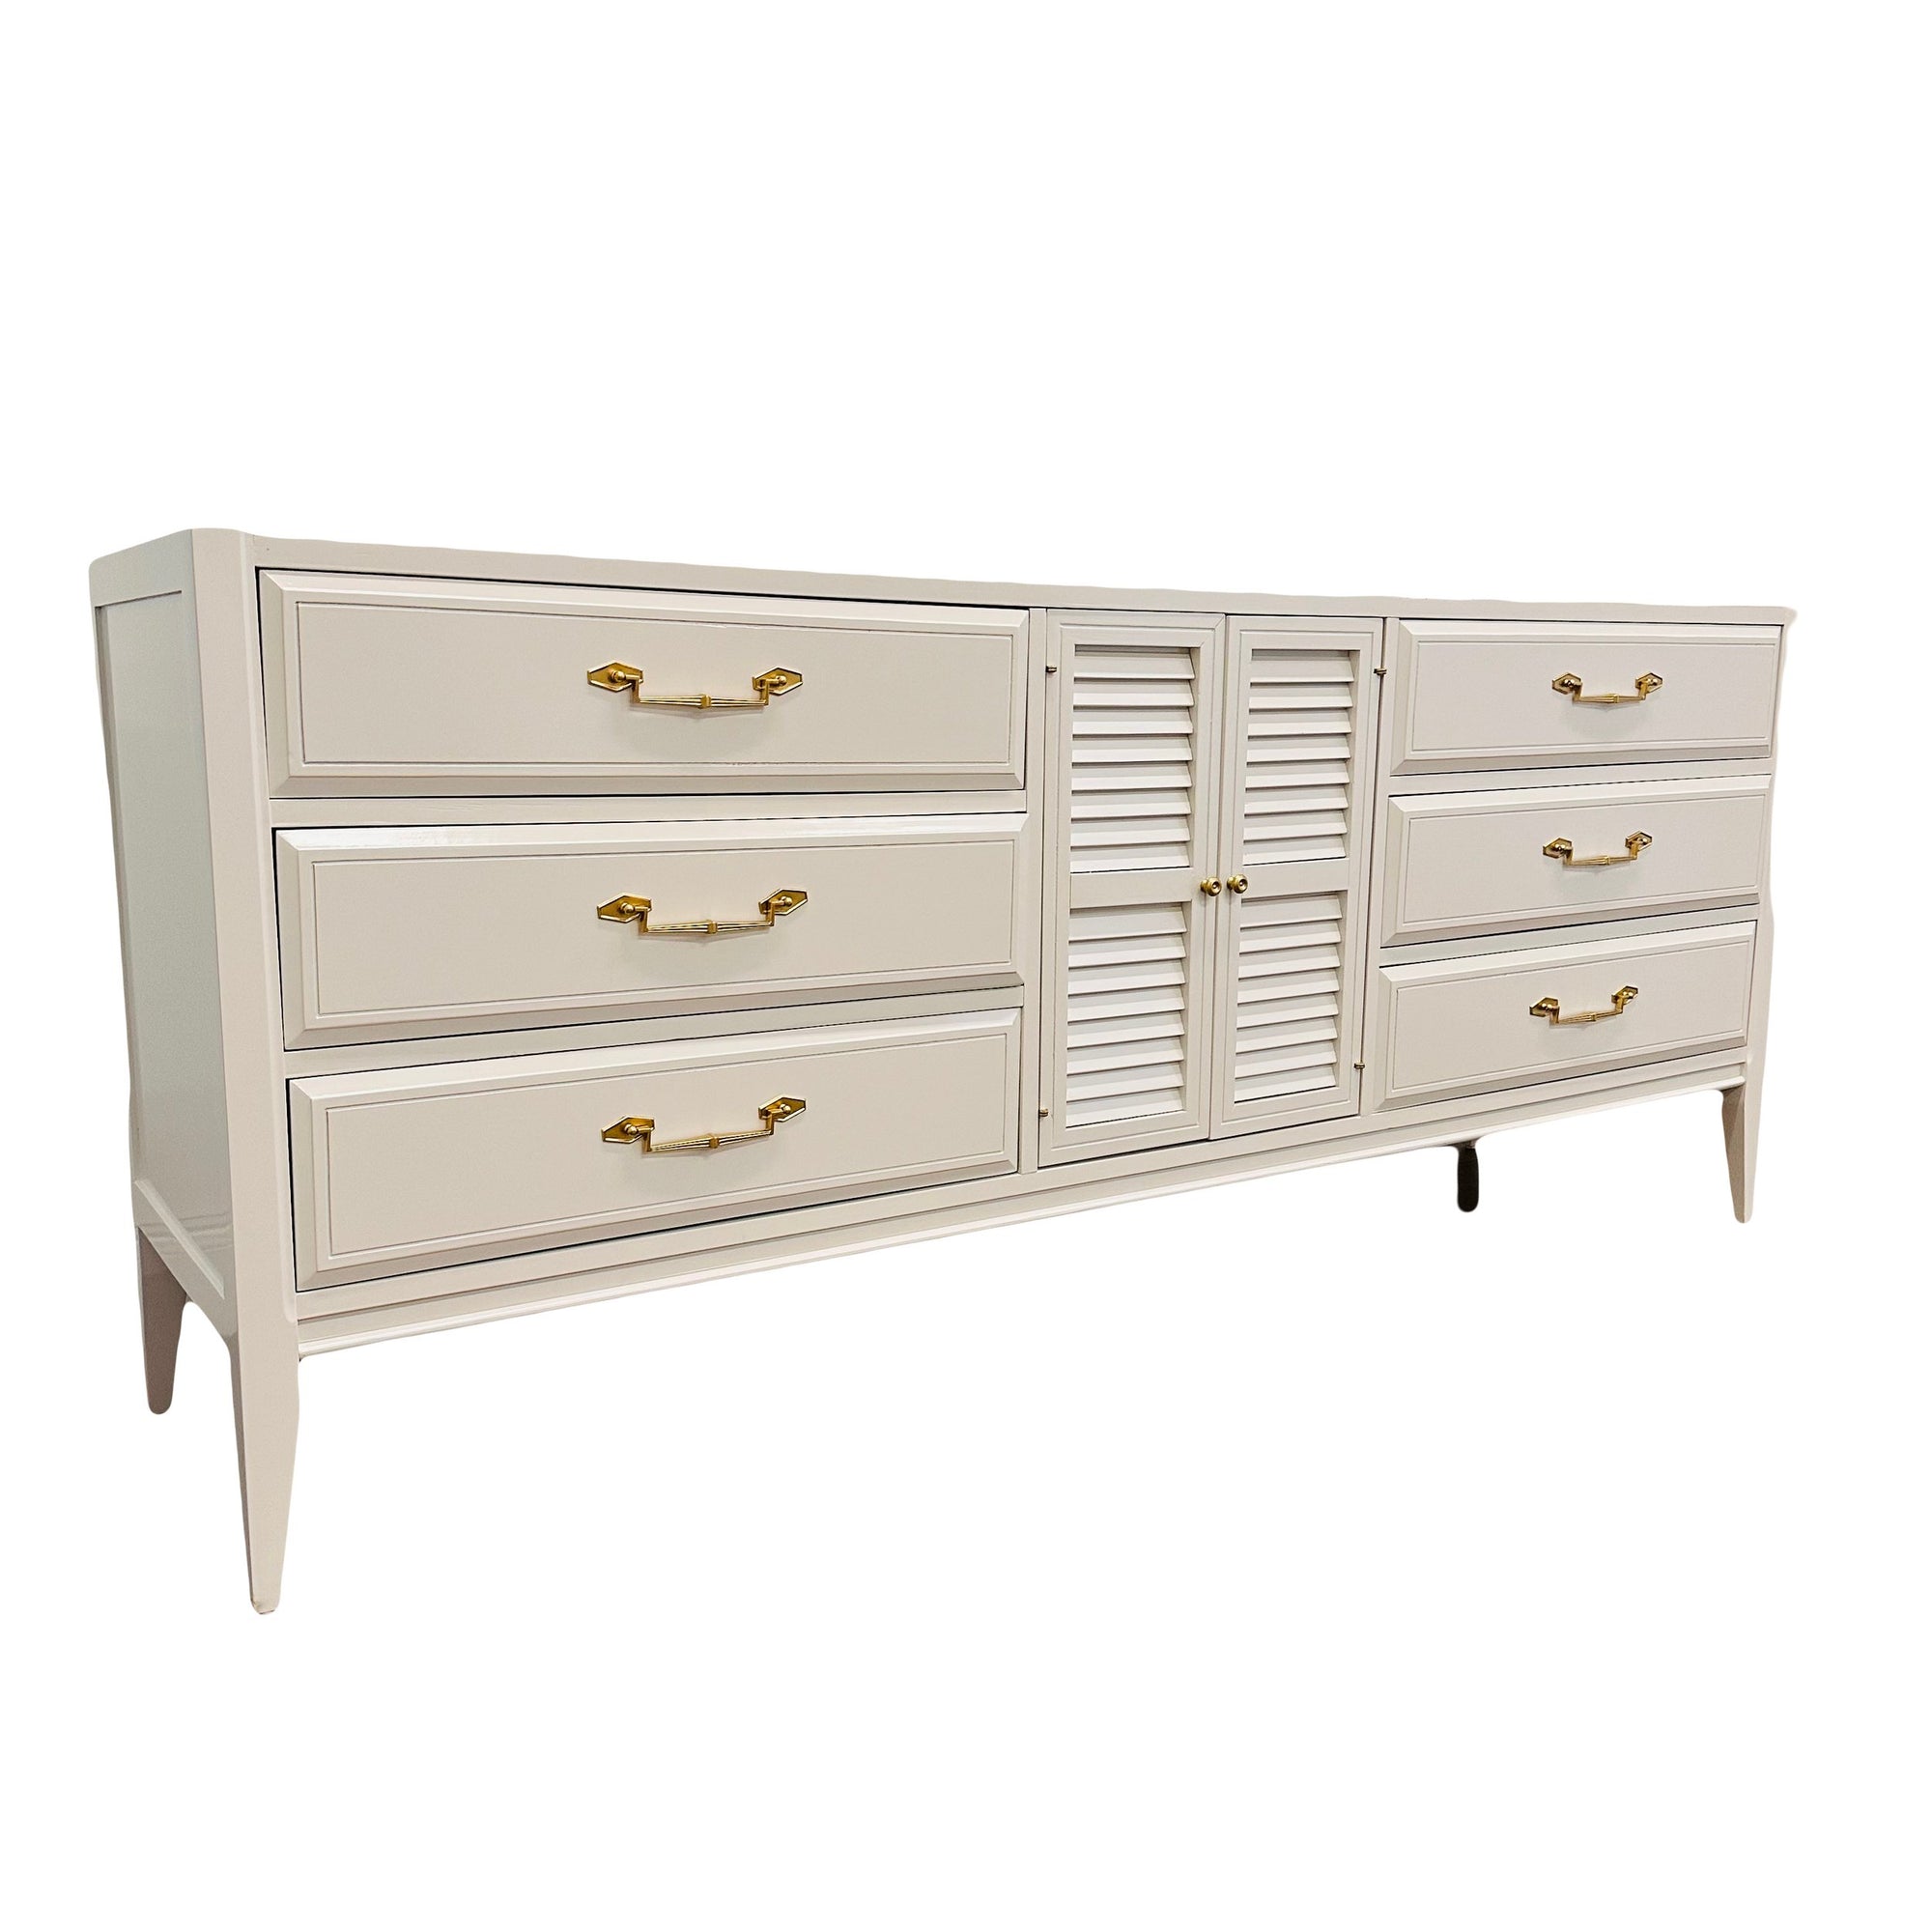 AVAILABLE: Pearly White Transitional Basic-Witz Dresser